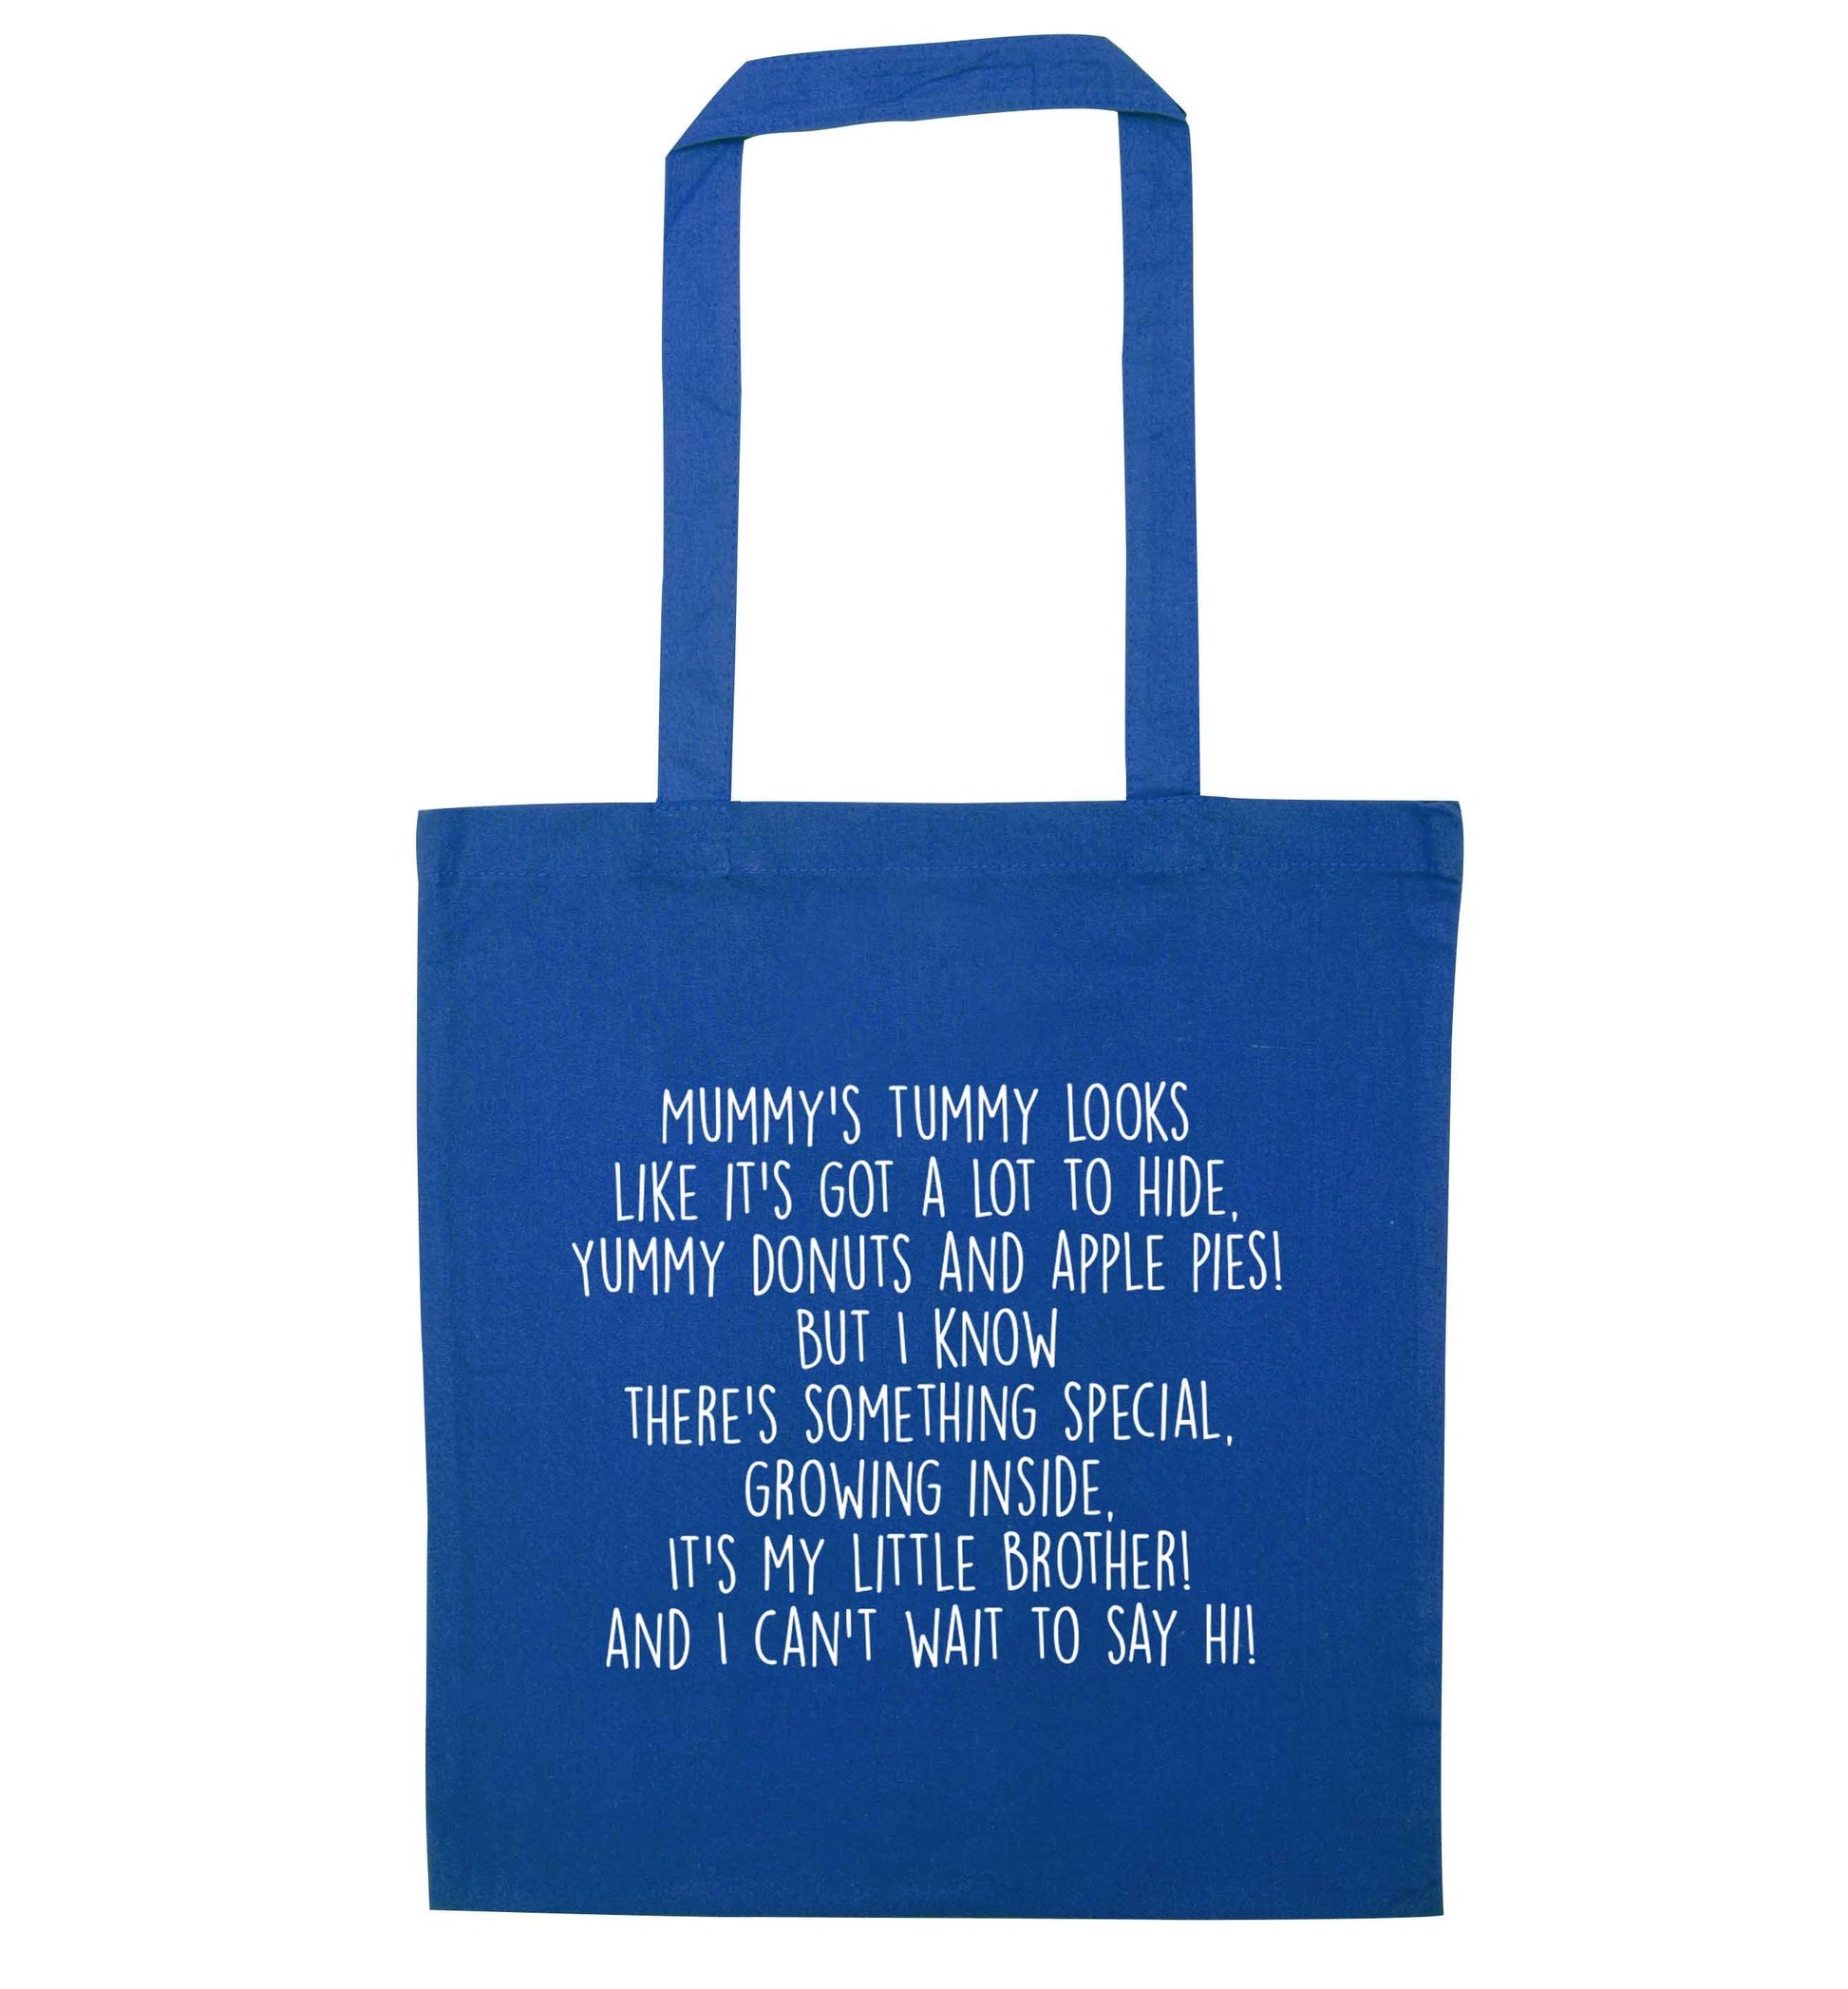 Something special growing inside it's my little brother I can't wait to say hi! blue tote bag